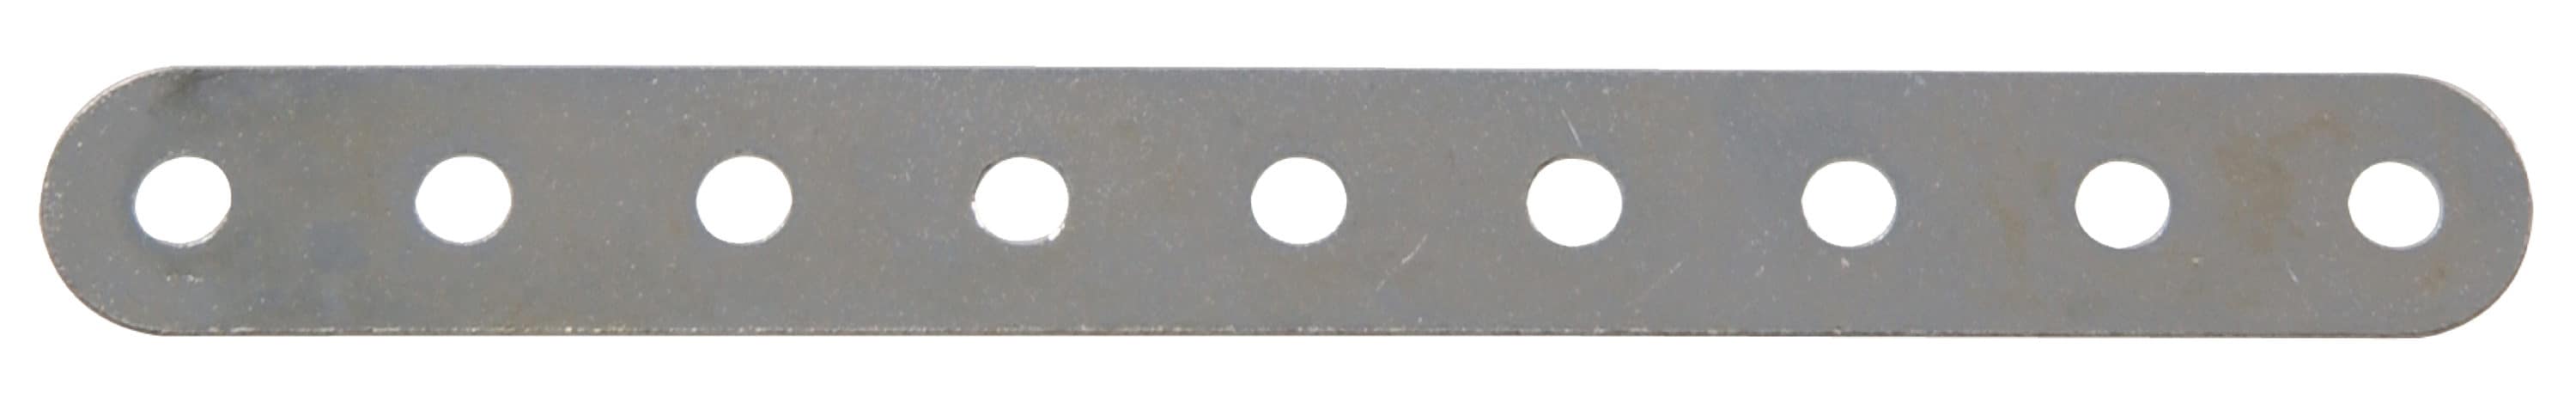 USP 5-in x 3-1/8-in 20-Gauge Galvanized Nail Plates at Lowes.com